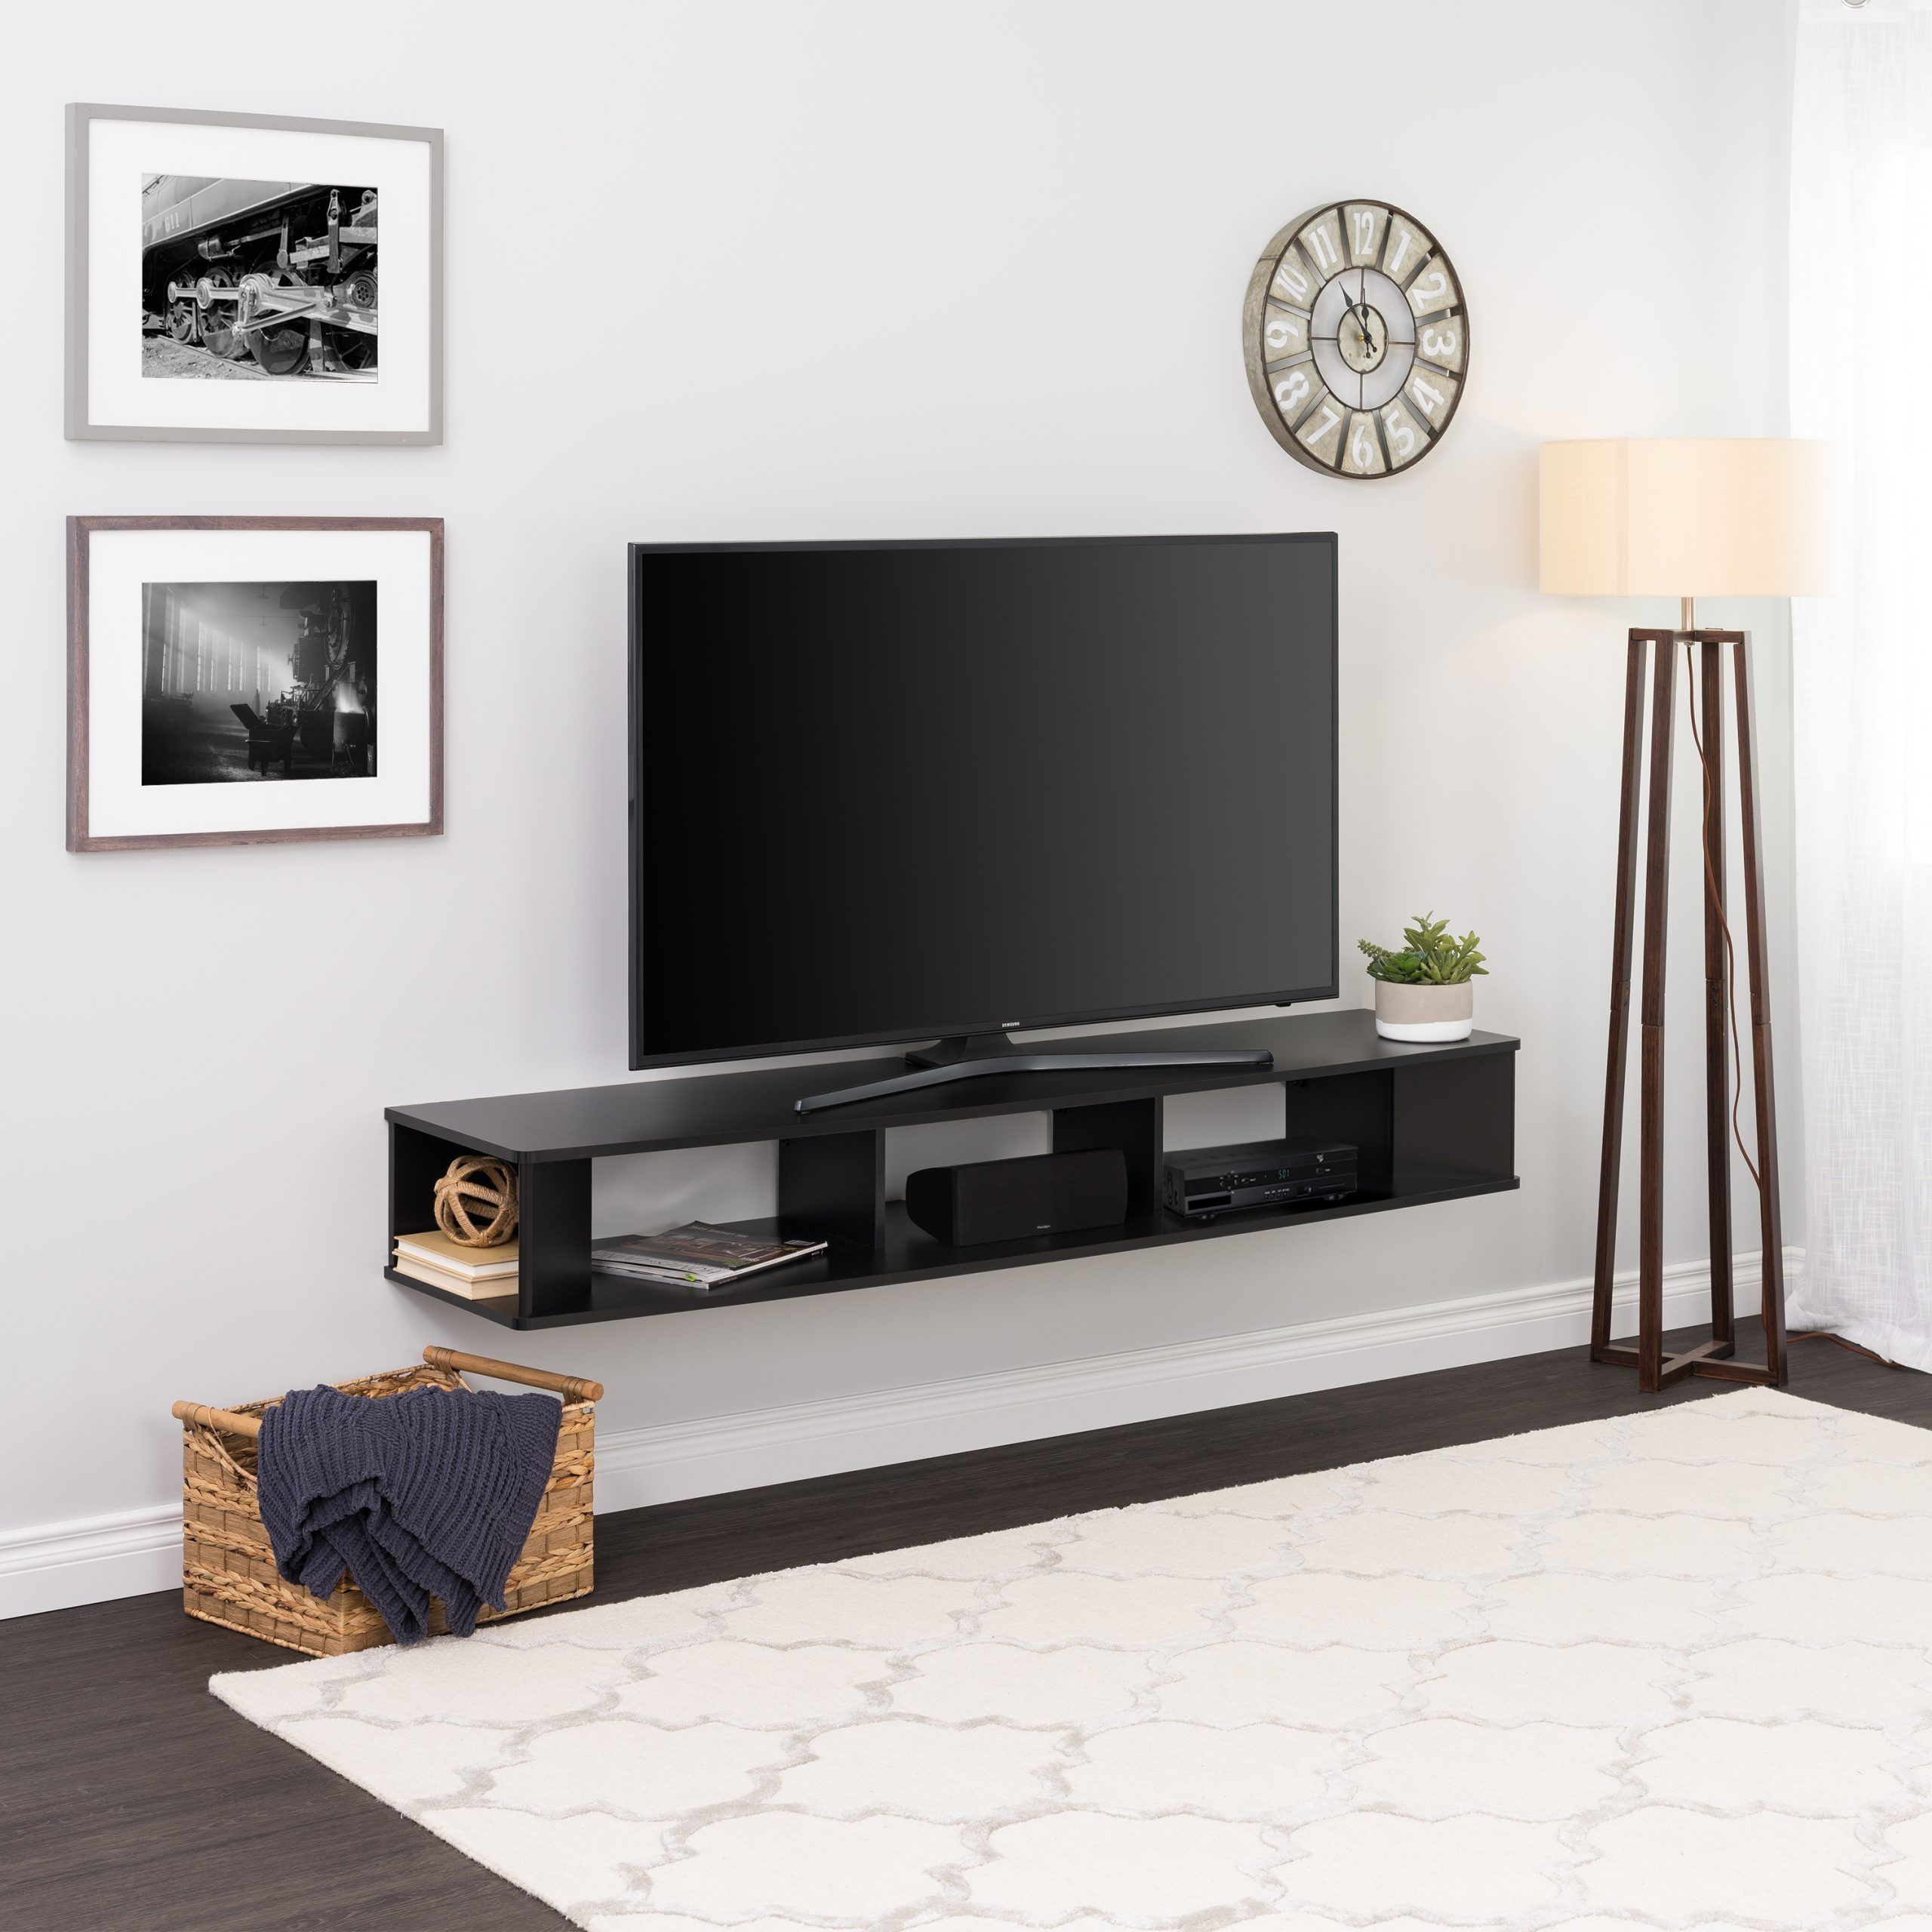 Prepac 70 Inch Wide Wall Mounted Tv Stand, Black – Walmart With Greenwich Wide Tv Stands (View 7 of 15)